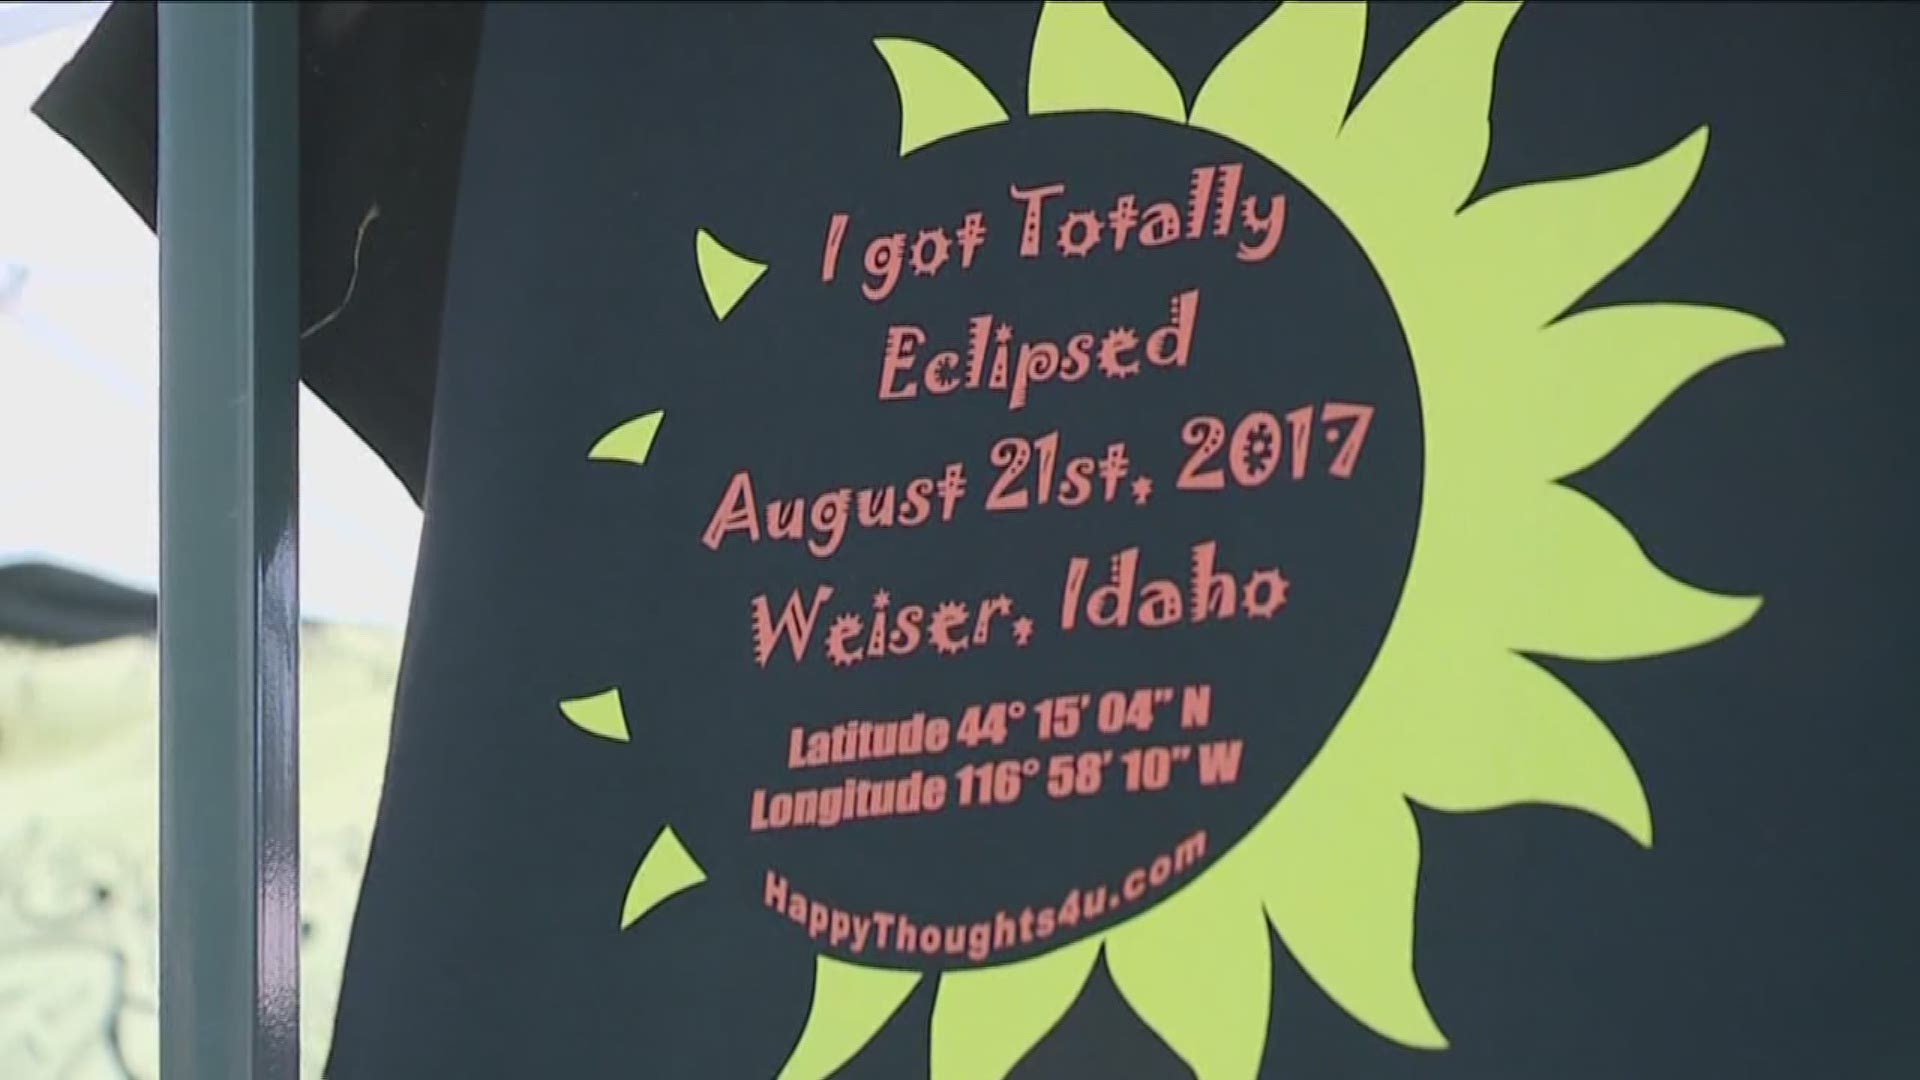 Natalie Shaver reports from Weiser, which is holding a festival all weekend, leading up to Monday's total solar eclipse.